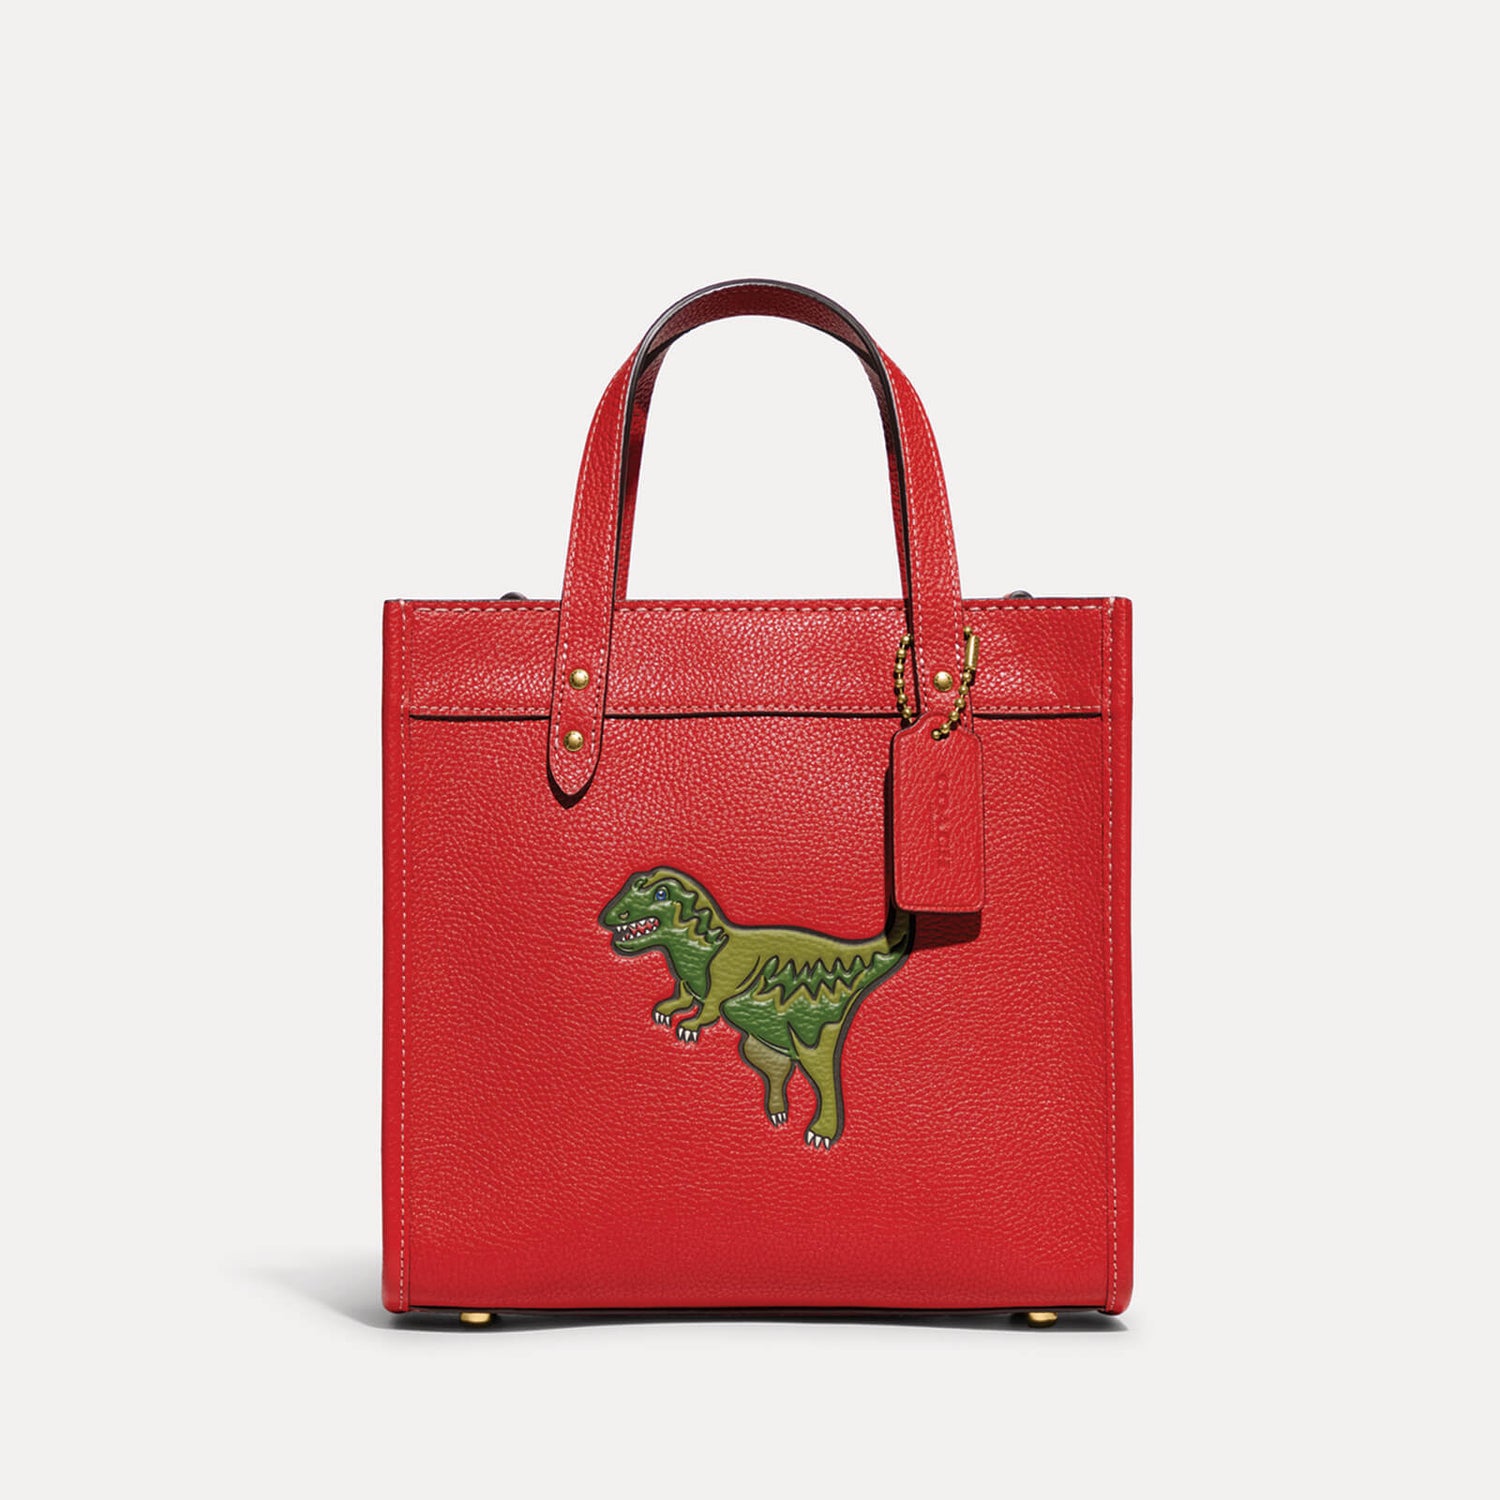 Coach Rexy Field 22 Leather Tote Bag